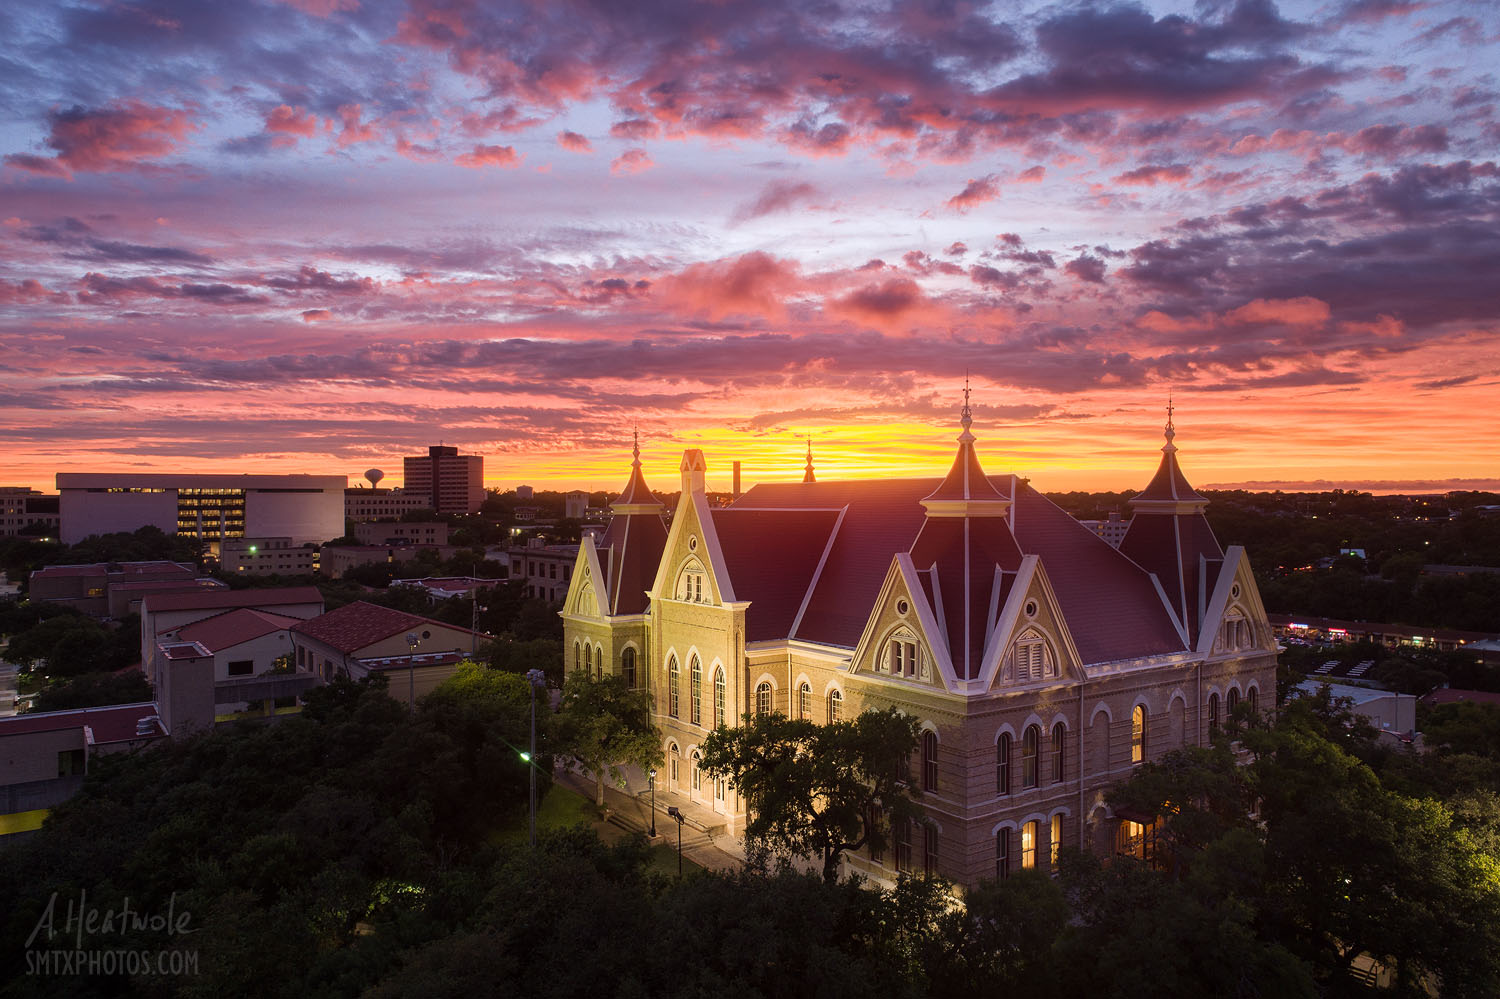 Sunset at Old Main on the Texas State University Campus in San Marcos, TX.